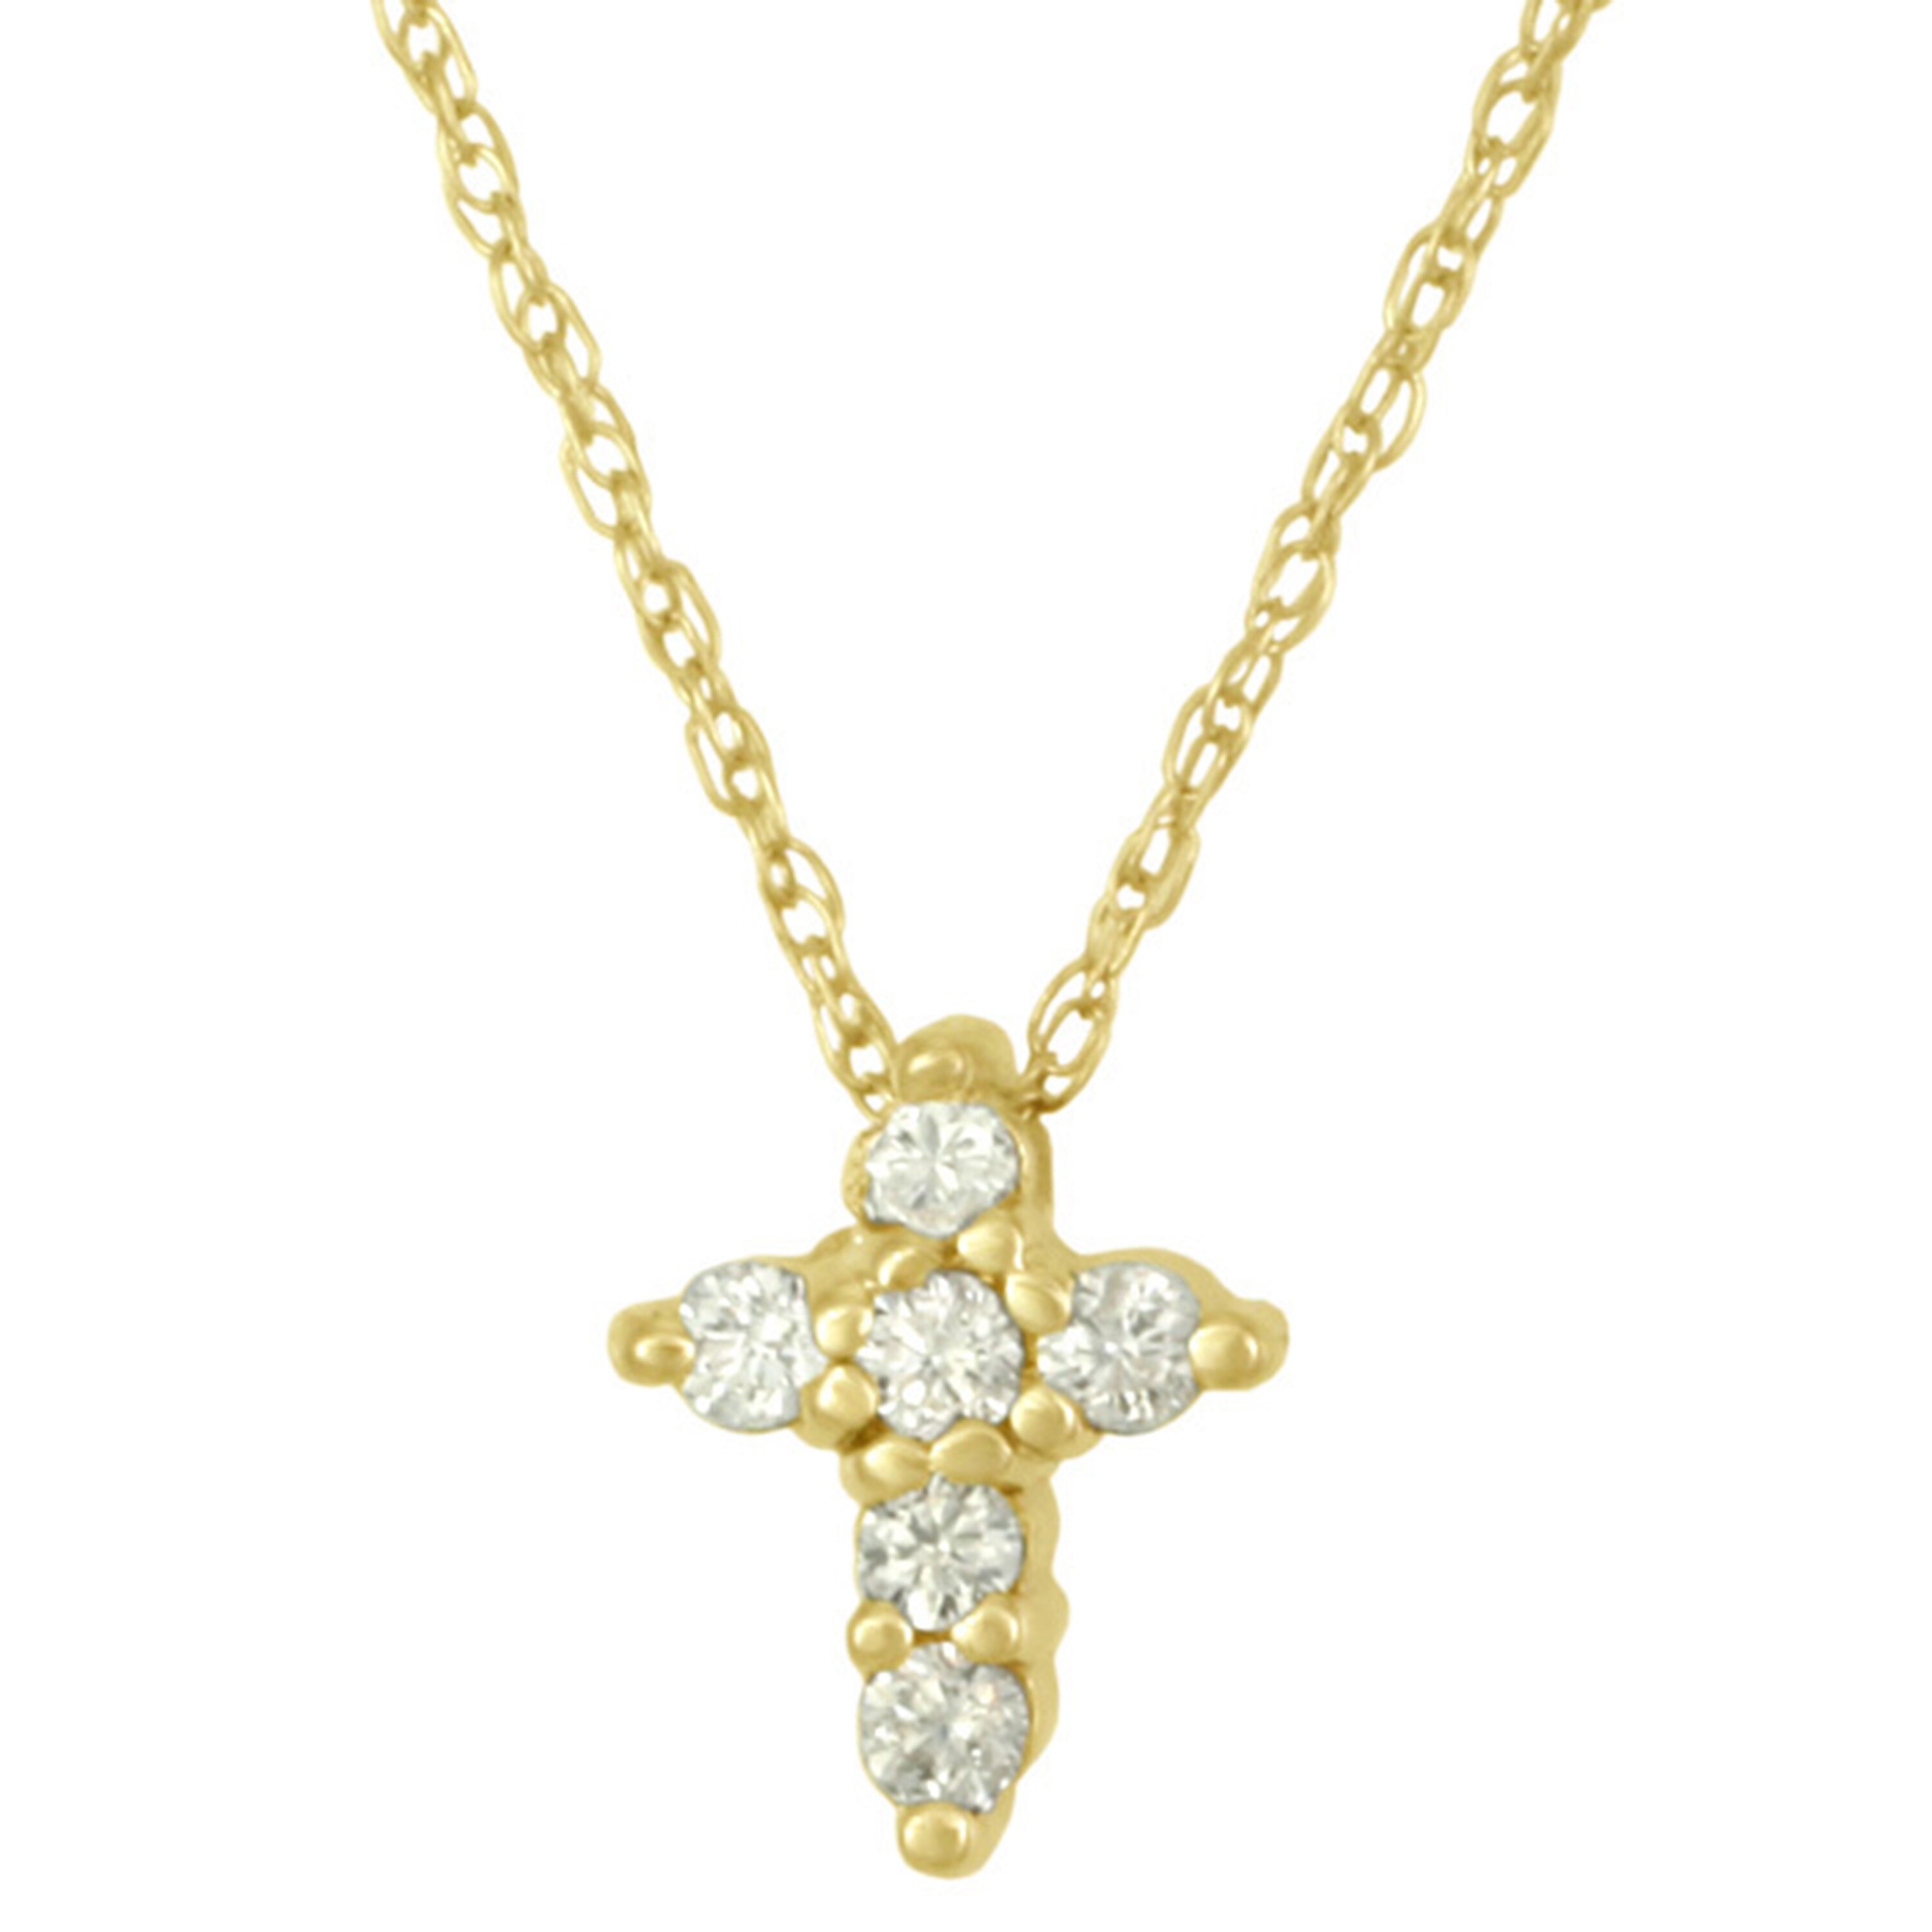 Shop Diamond Cross Necklace with Round 